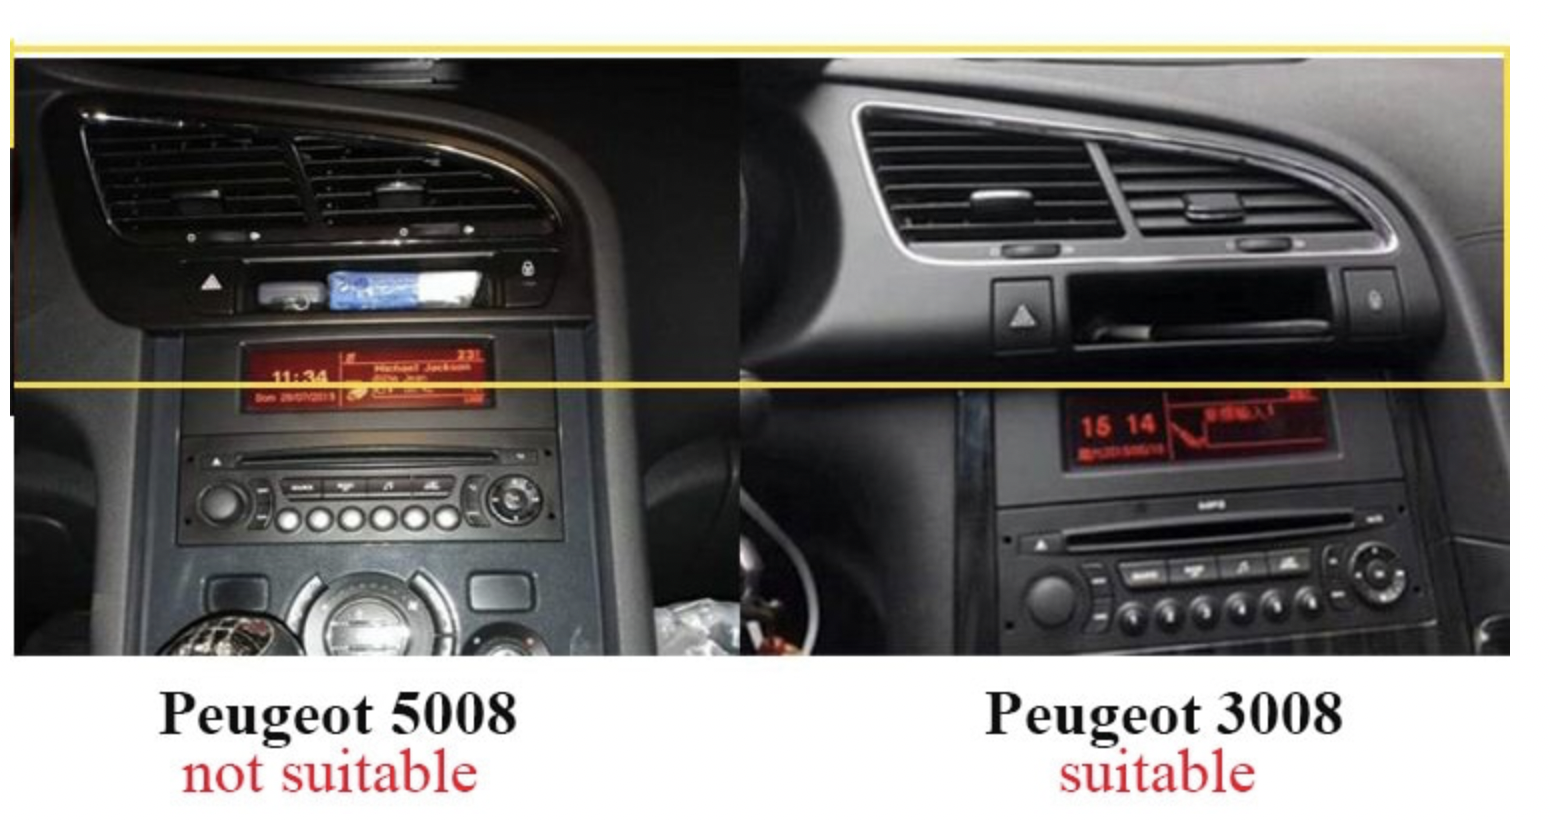 Tablette tactile Android 13.0 + Apple Carplay Peugeot 3008